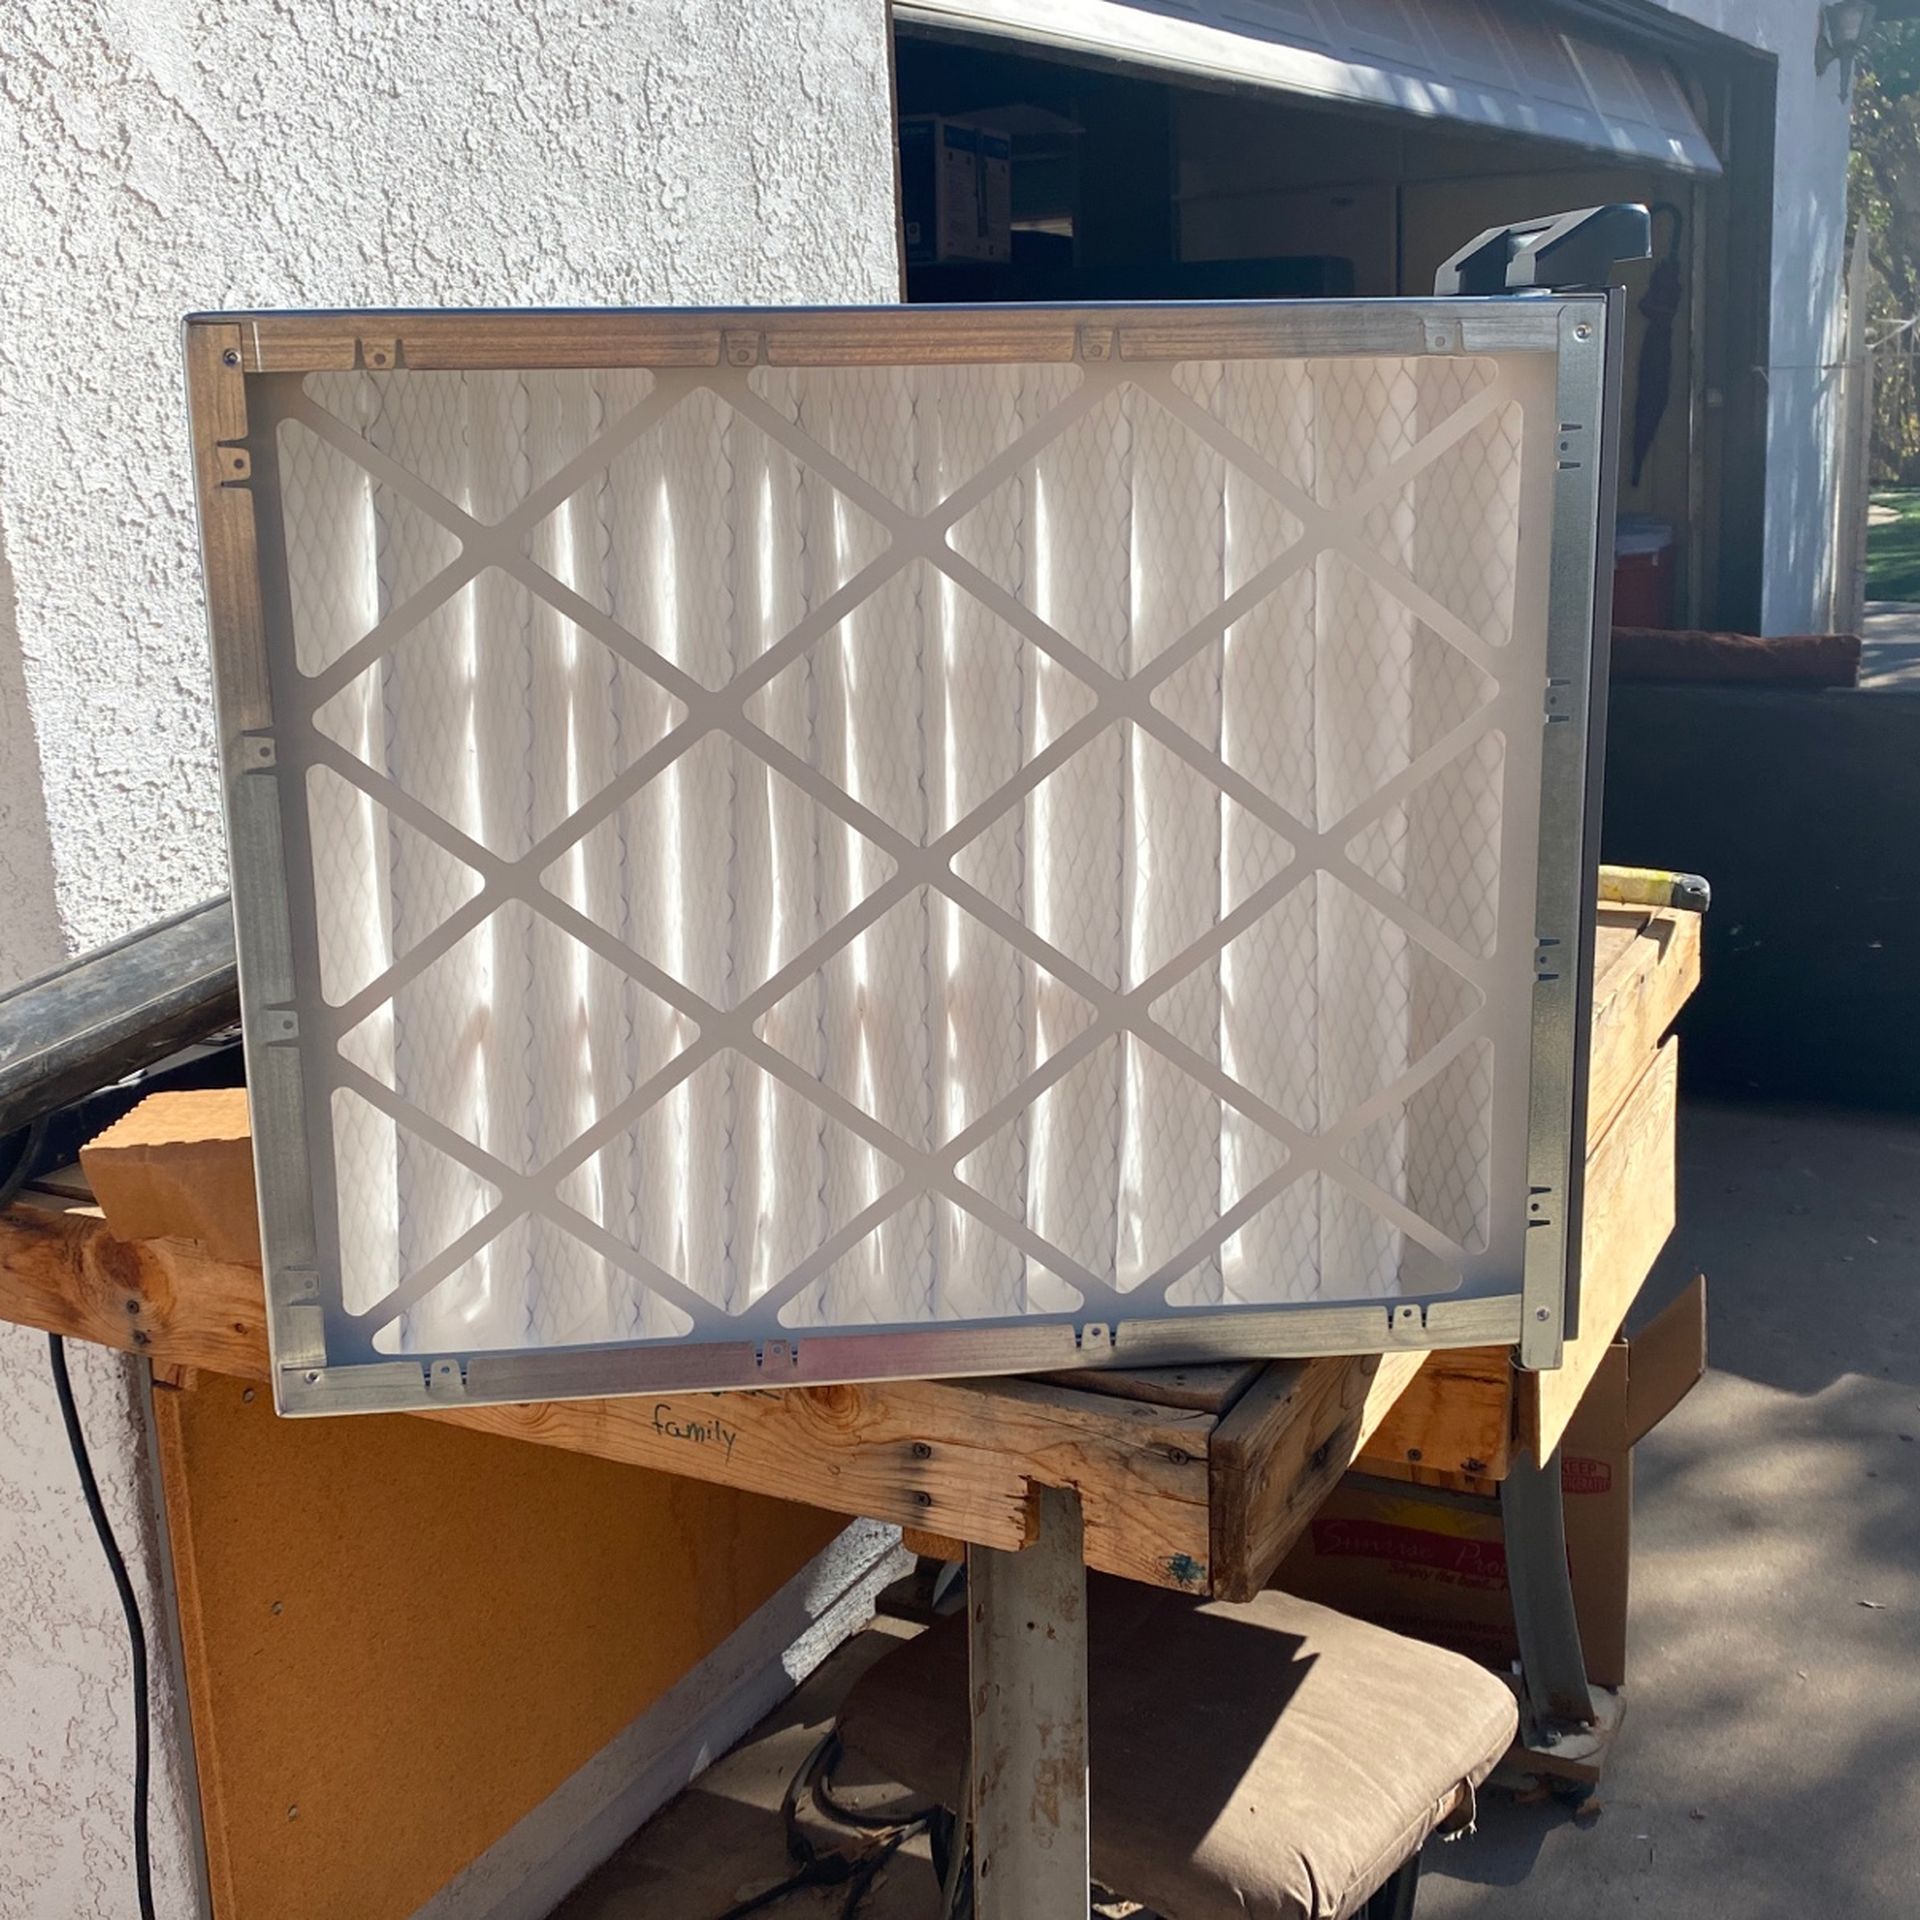 5 inch Hepa Filter and filter base